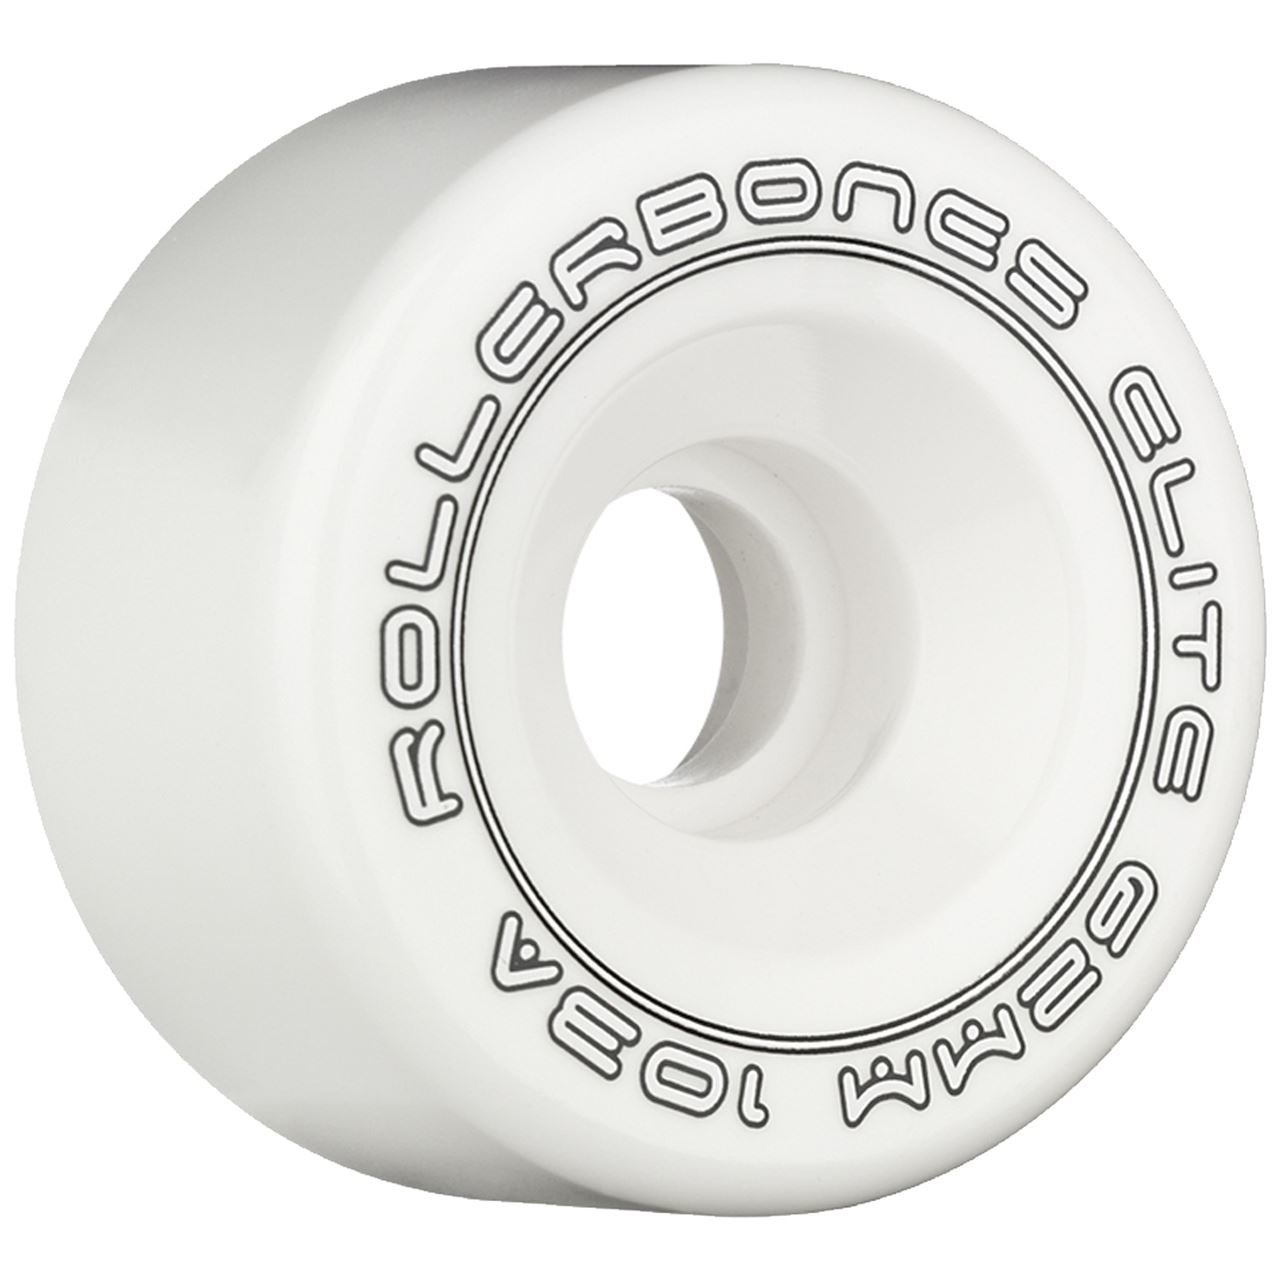 Rollerbones Art Elite Competition Wheels White 62mm 103a - Set of 8